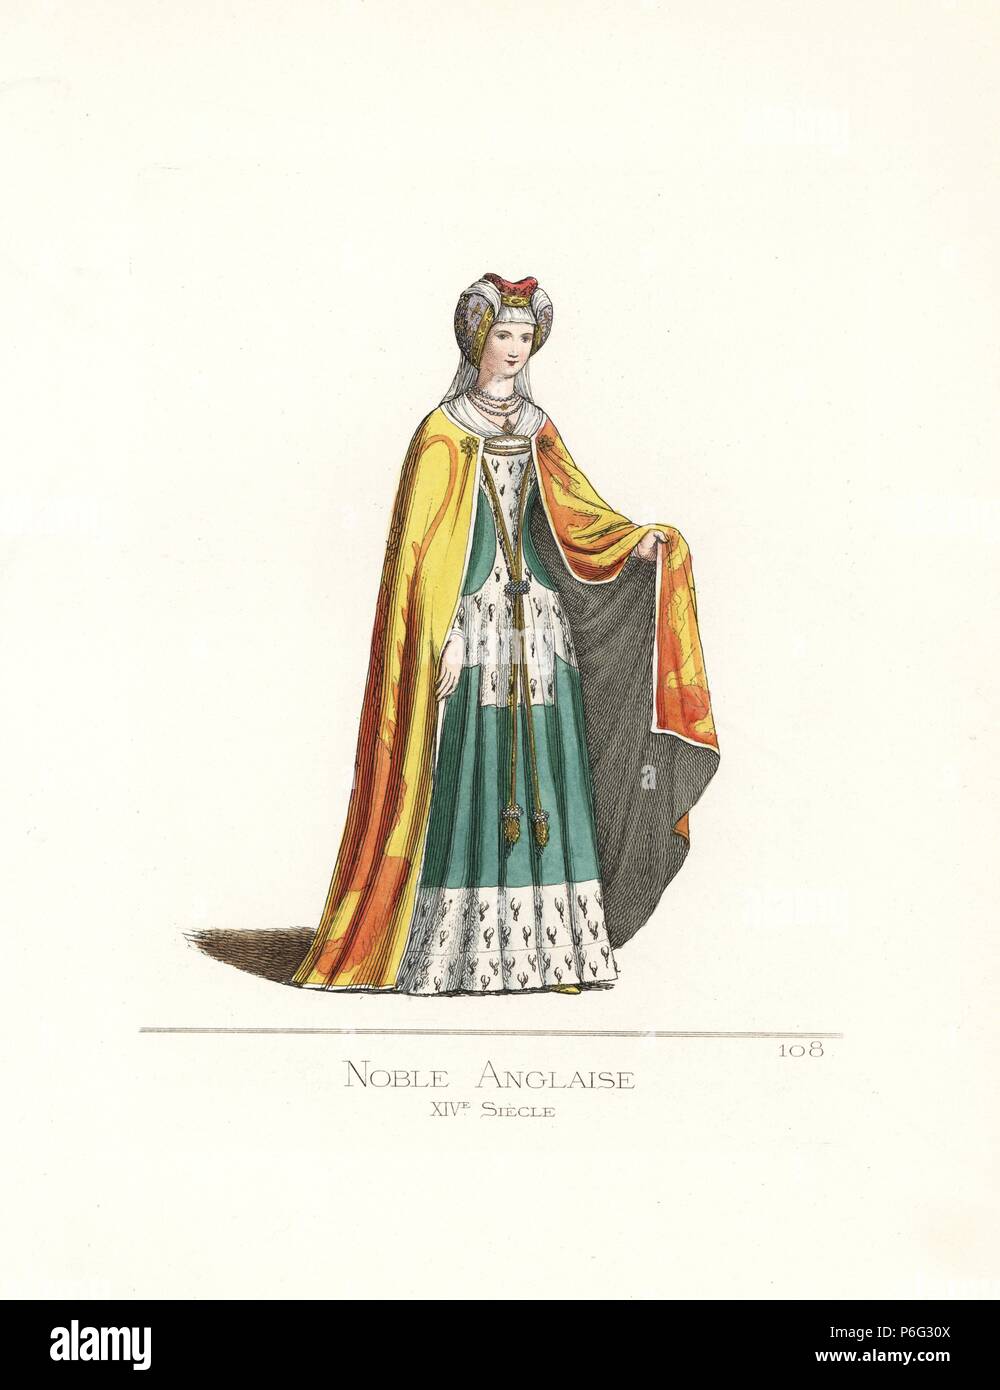 Costume of an English noblewoman, 14th century. She wears a headdress red crown and violet ear covers, white veil, cape decorated with heraldic lions, green dress trimmed with ermine. From the sepulchral stone of Joyeuese Tiptoft in a church in Enfield, died 1446. Handcoloured illustration drawn and lithographed by Paul Mercuri with text by Camille Bonnard from 'Historical Costumes from the 12th to 15th Centuries,' Levy Fils, Paris, 1861. Stock Photo